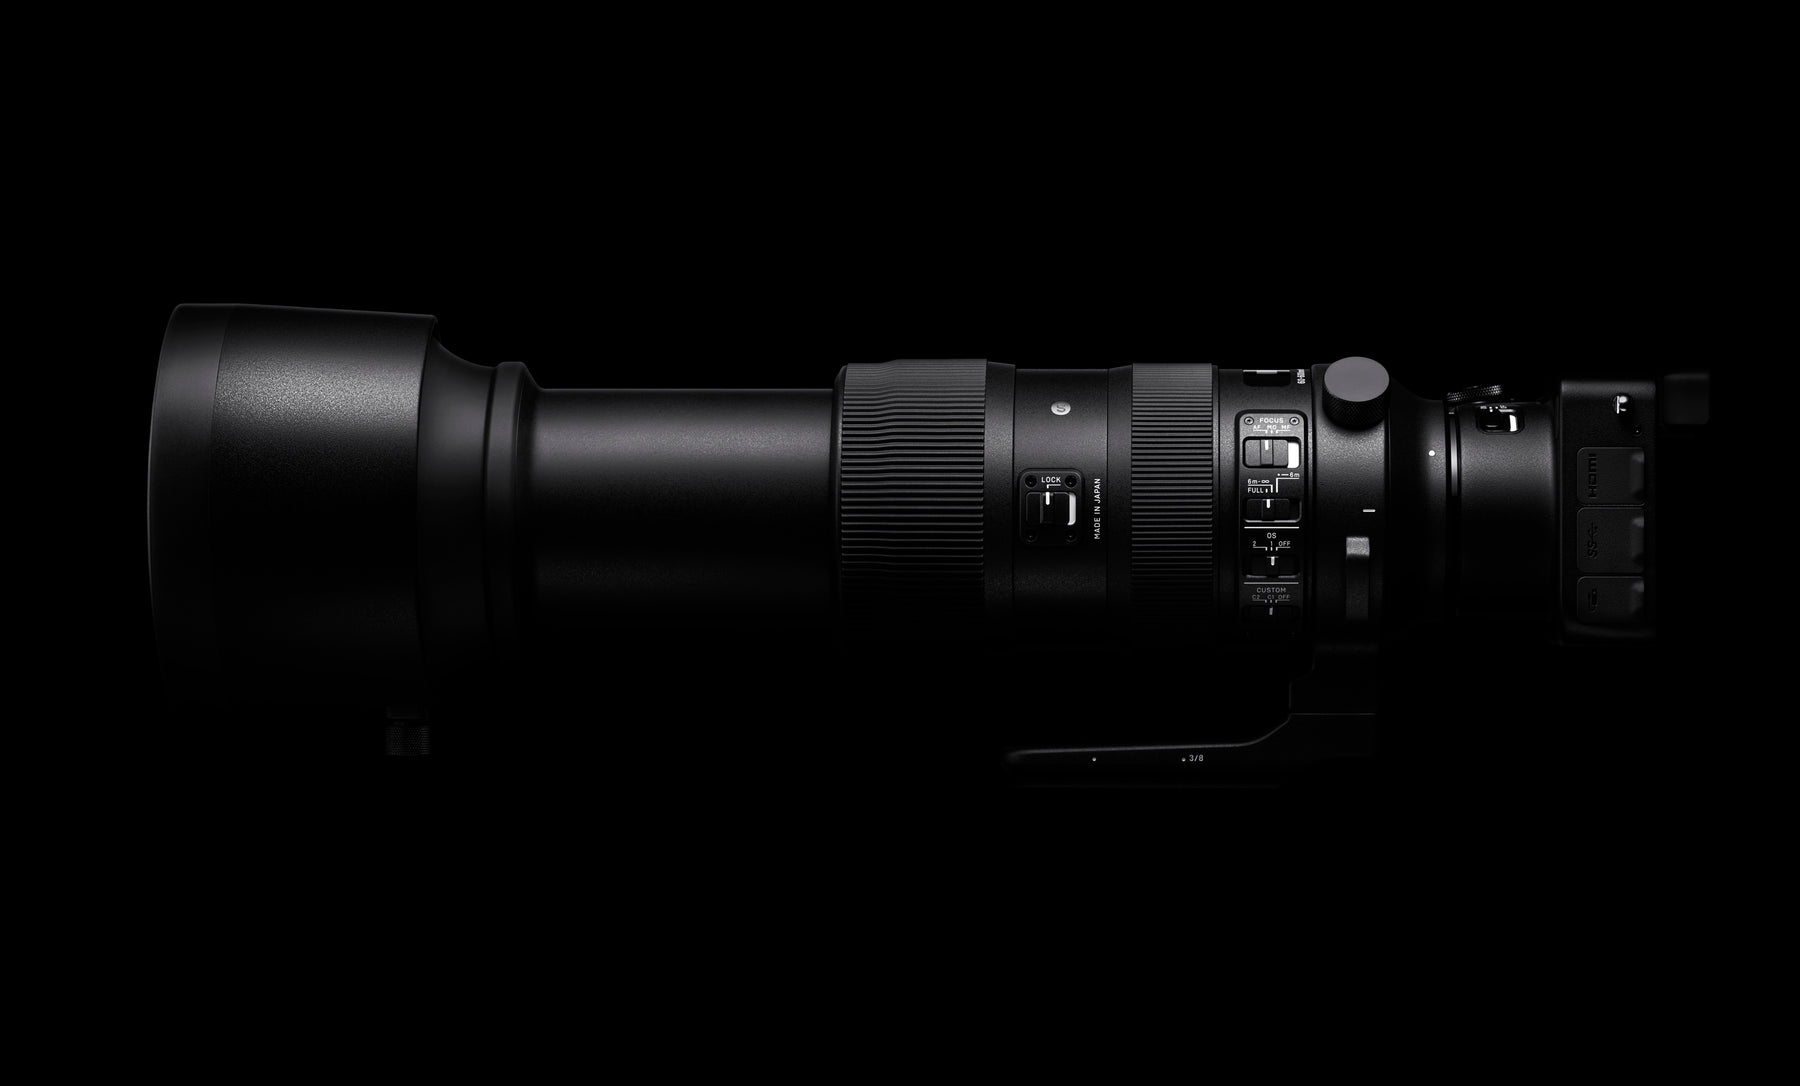 Firmware update for SIGMA Global Vision lenses in L-Mount